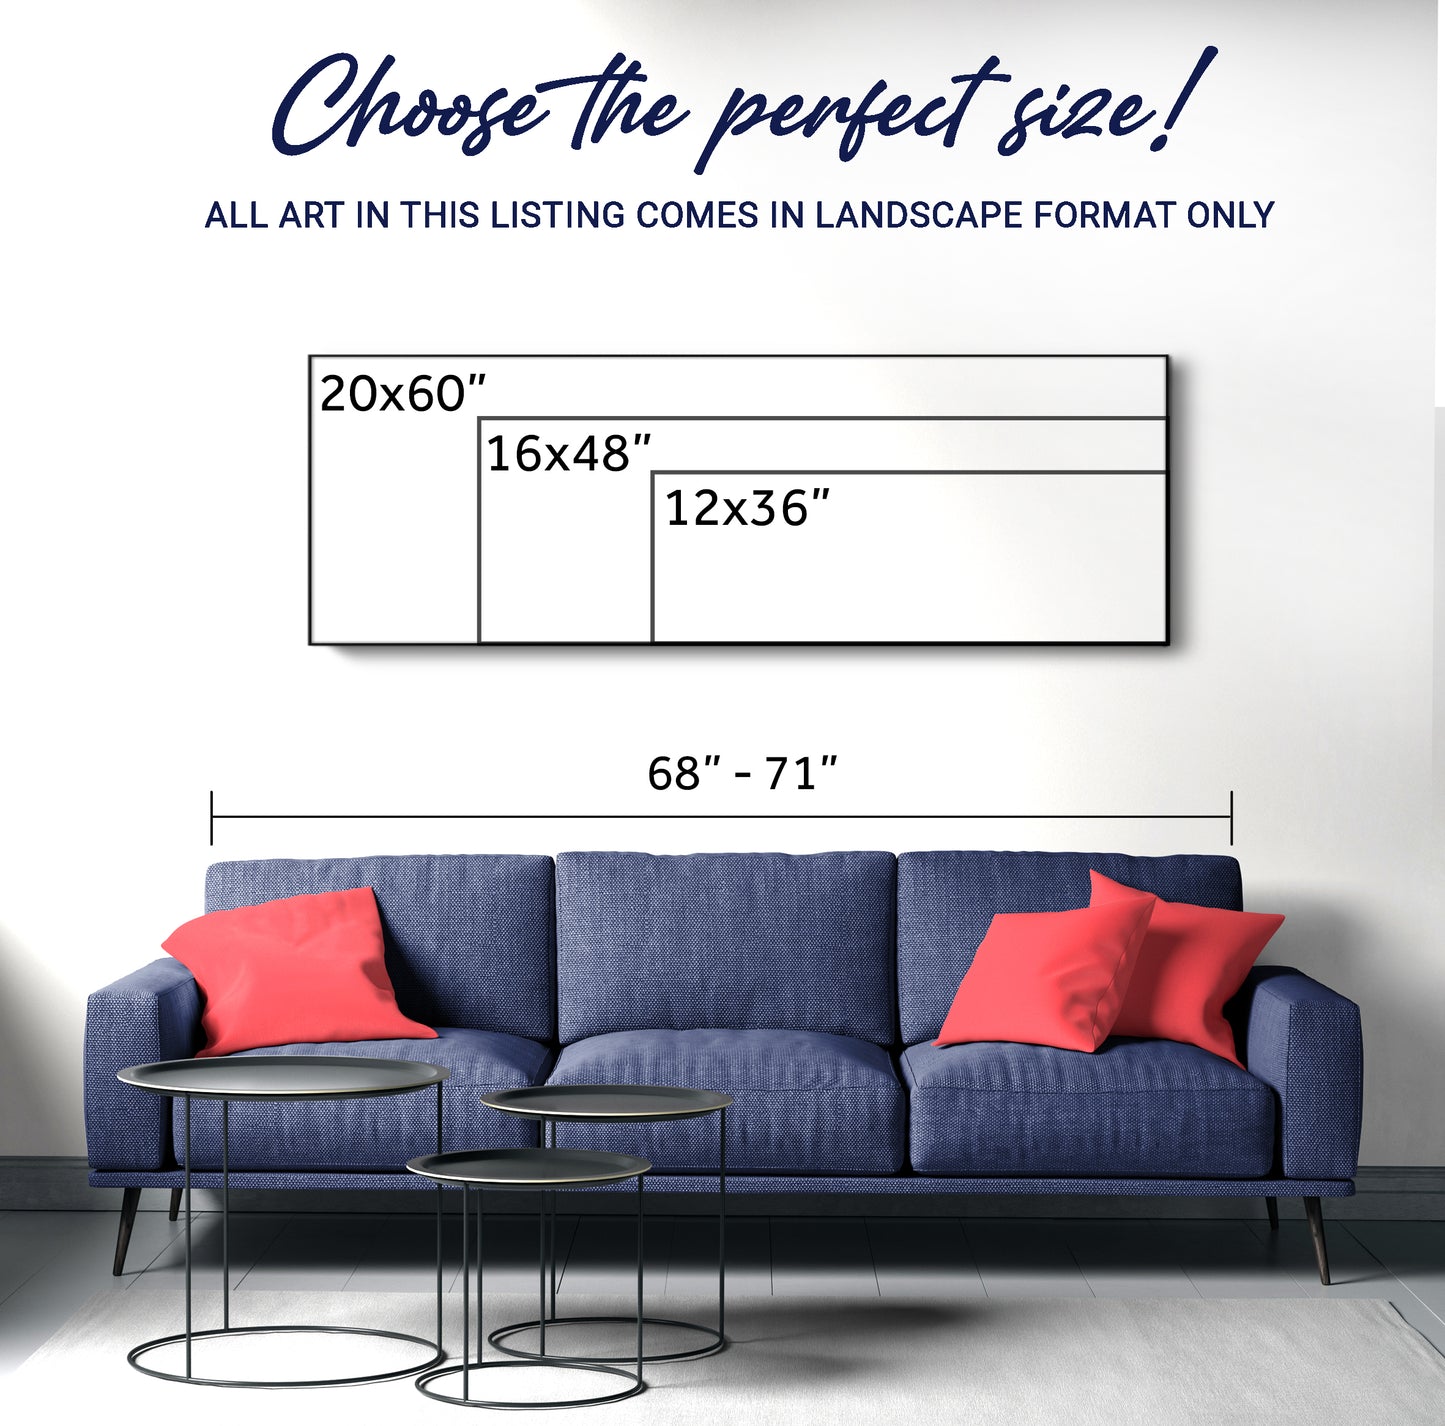 The Perfect Blend Sign (Free Shipping)